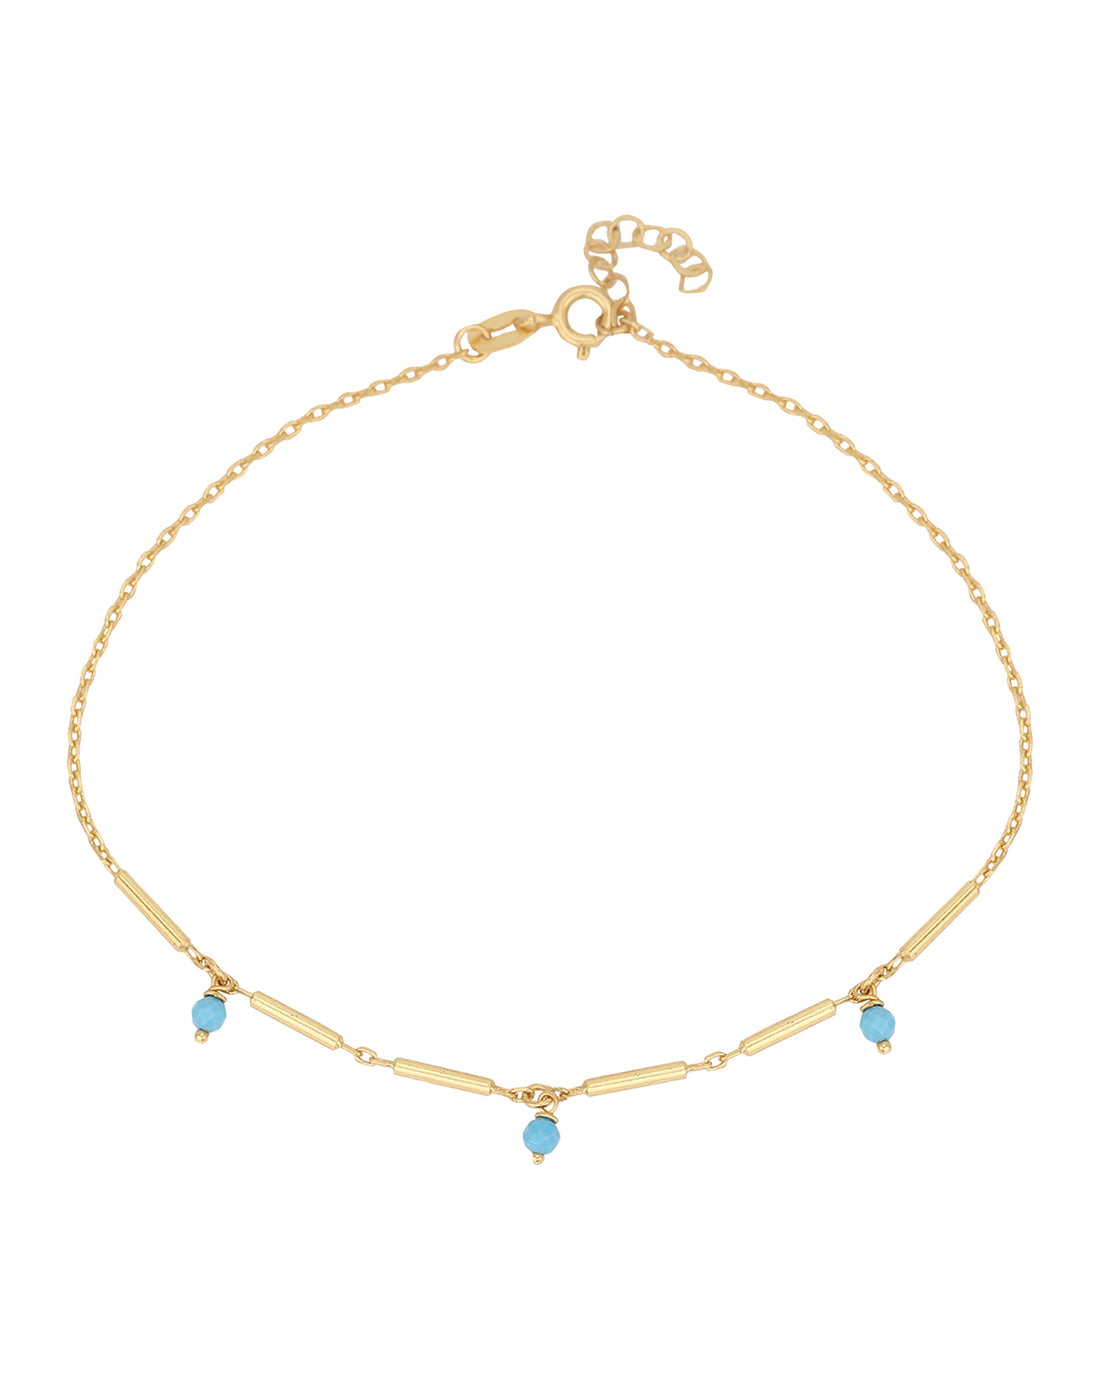 Carlton London Gold-Plated Blue Beads Anklet For Women